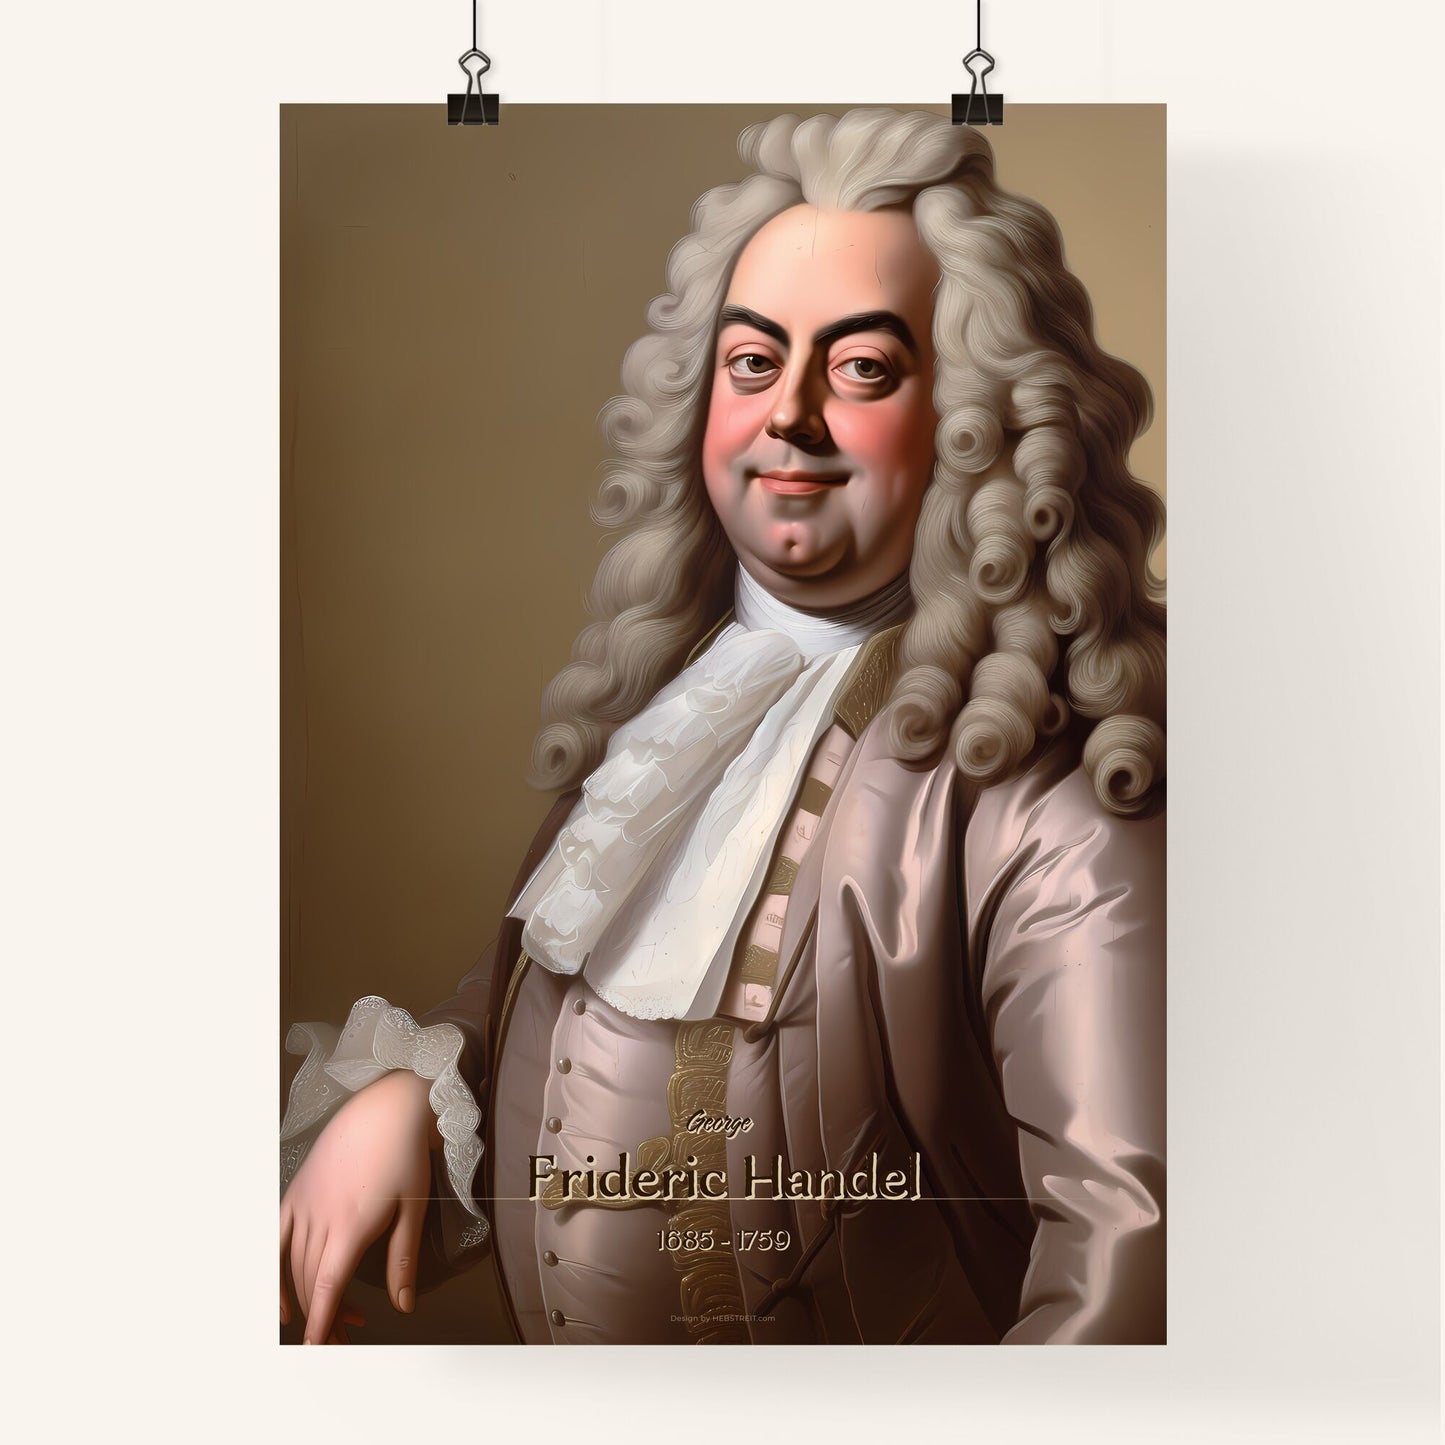 George, Frideric Handel, 1685 - 1759, A Poster of a man with long curly hair wearing a garment Default Title